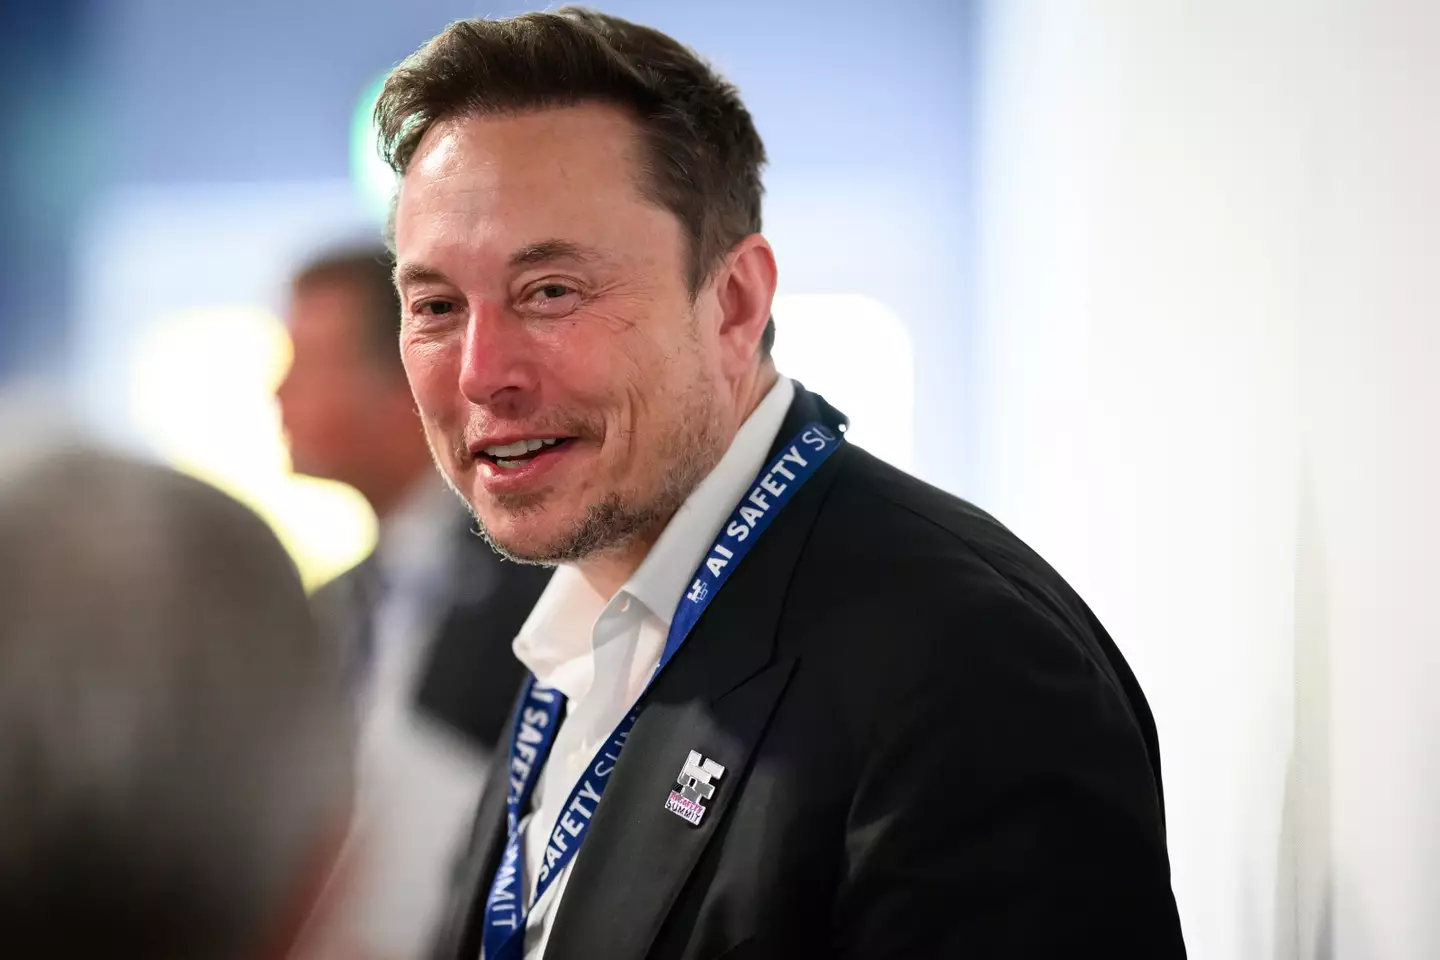 Elon Musk currently sits at the top of the rich list.